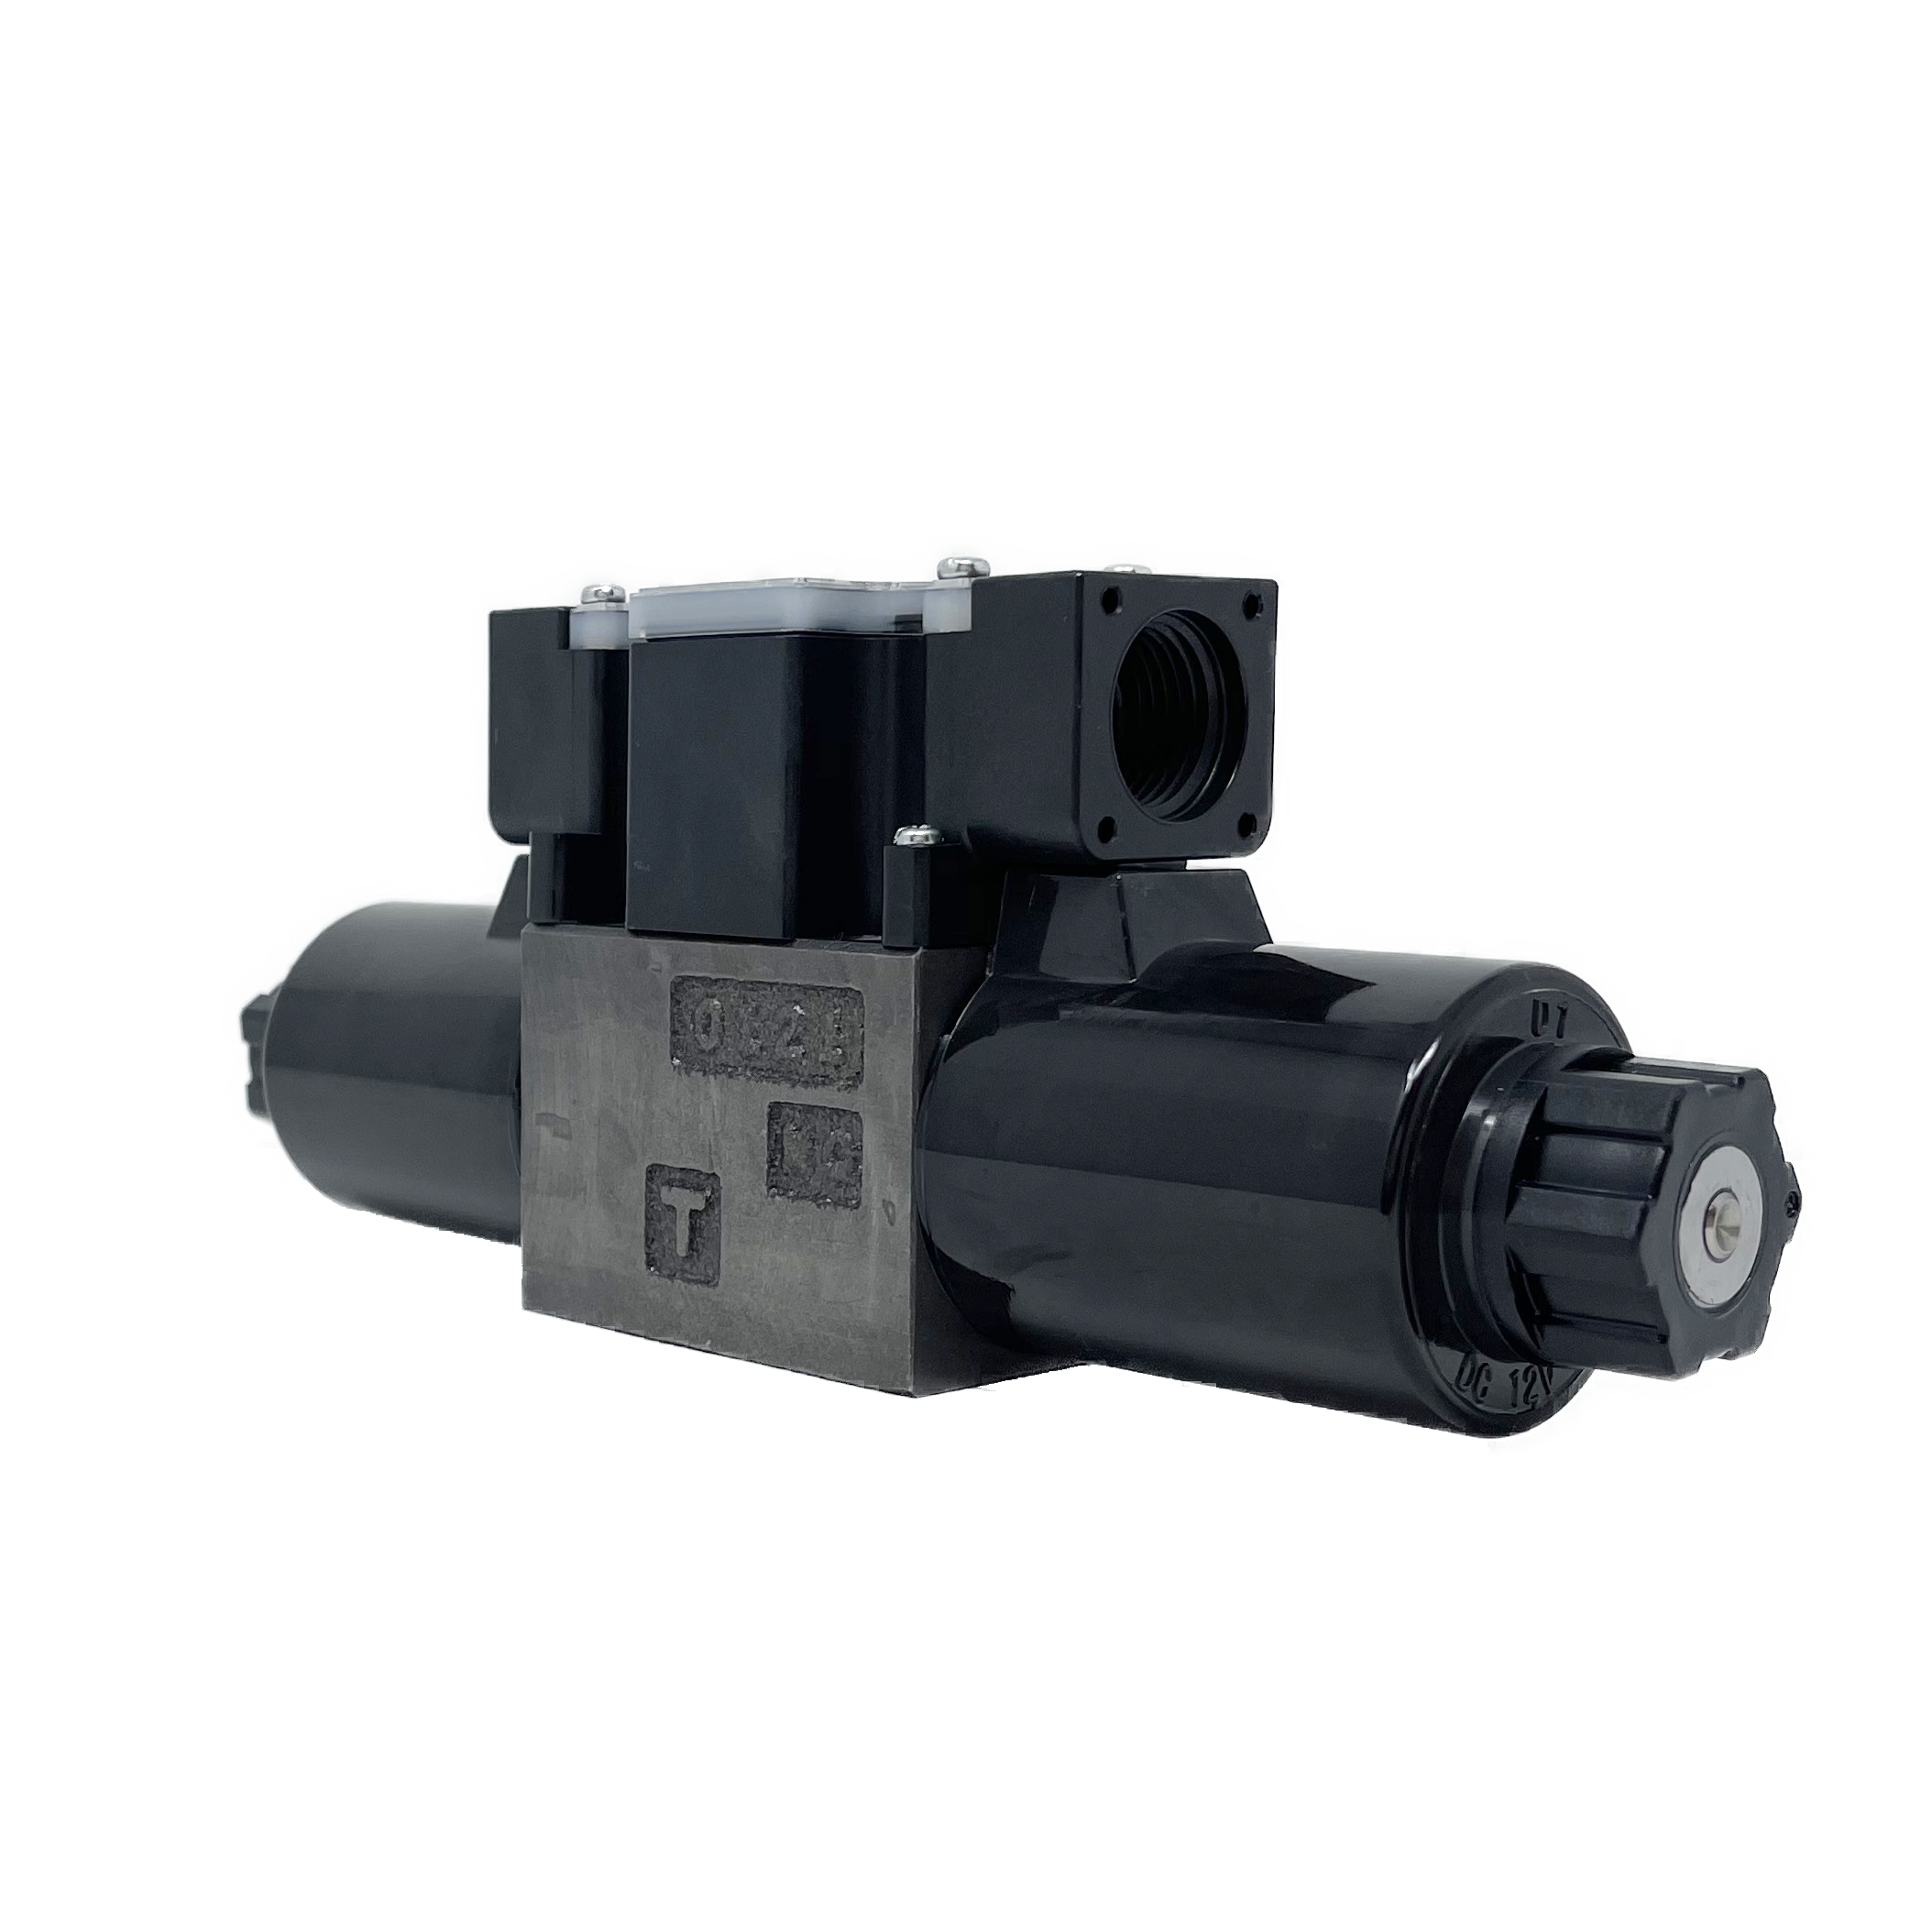 SS-G01-C5-R-C115-E31 : Nachi Solenoid Valve, 3P4W, D03 (NG6), 26.4GPM, 5075psi, All Ports Blocked Neutral, 110 VAC, Wiring Box with Lights